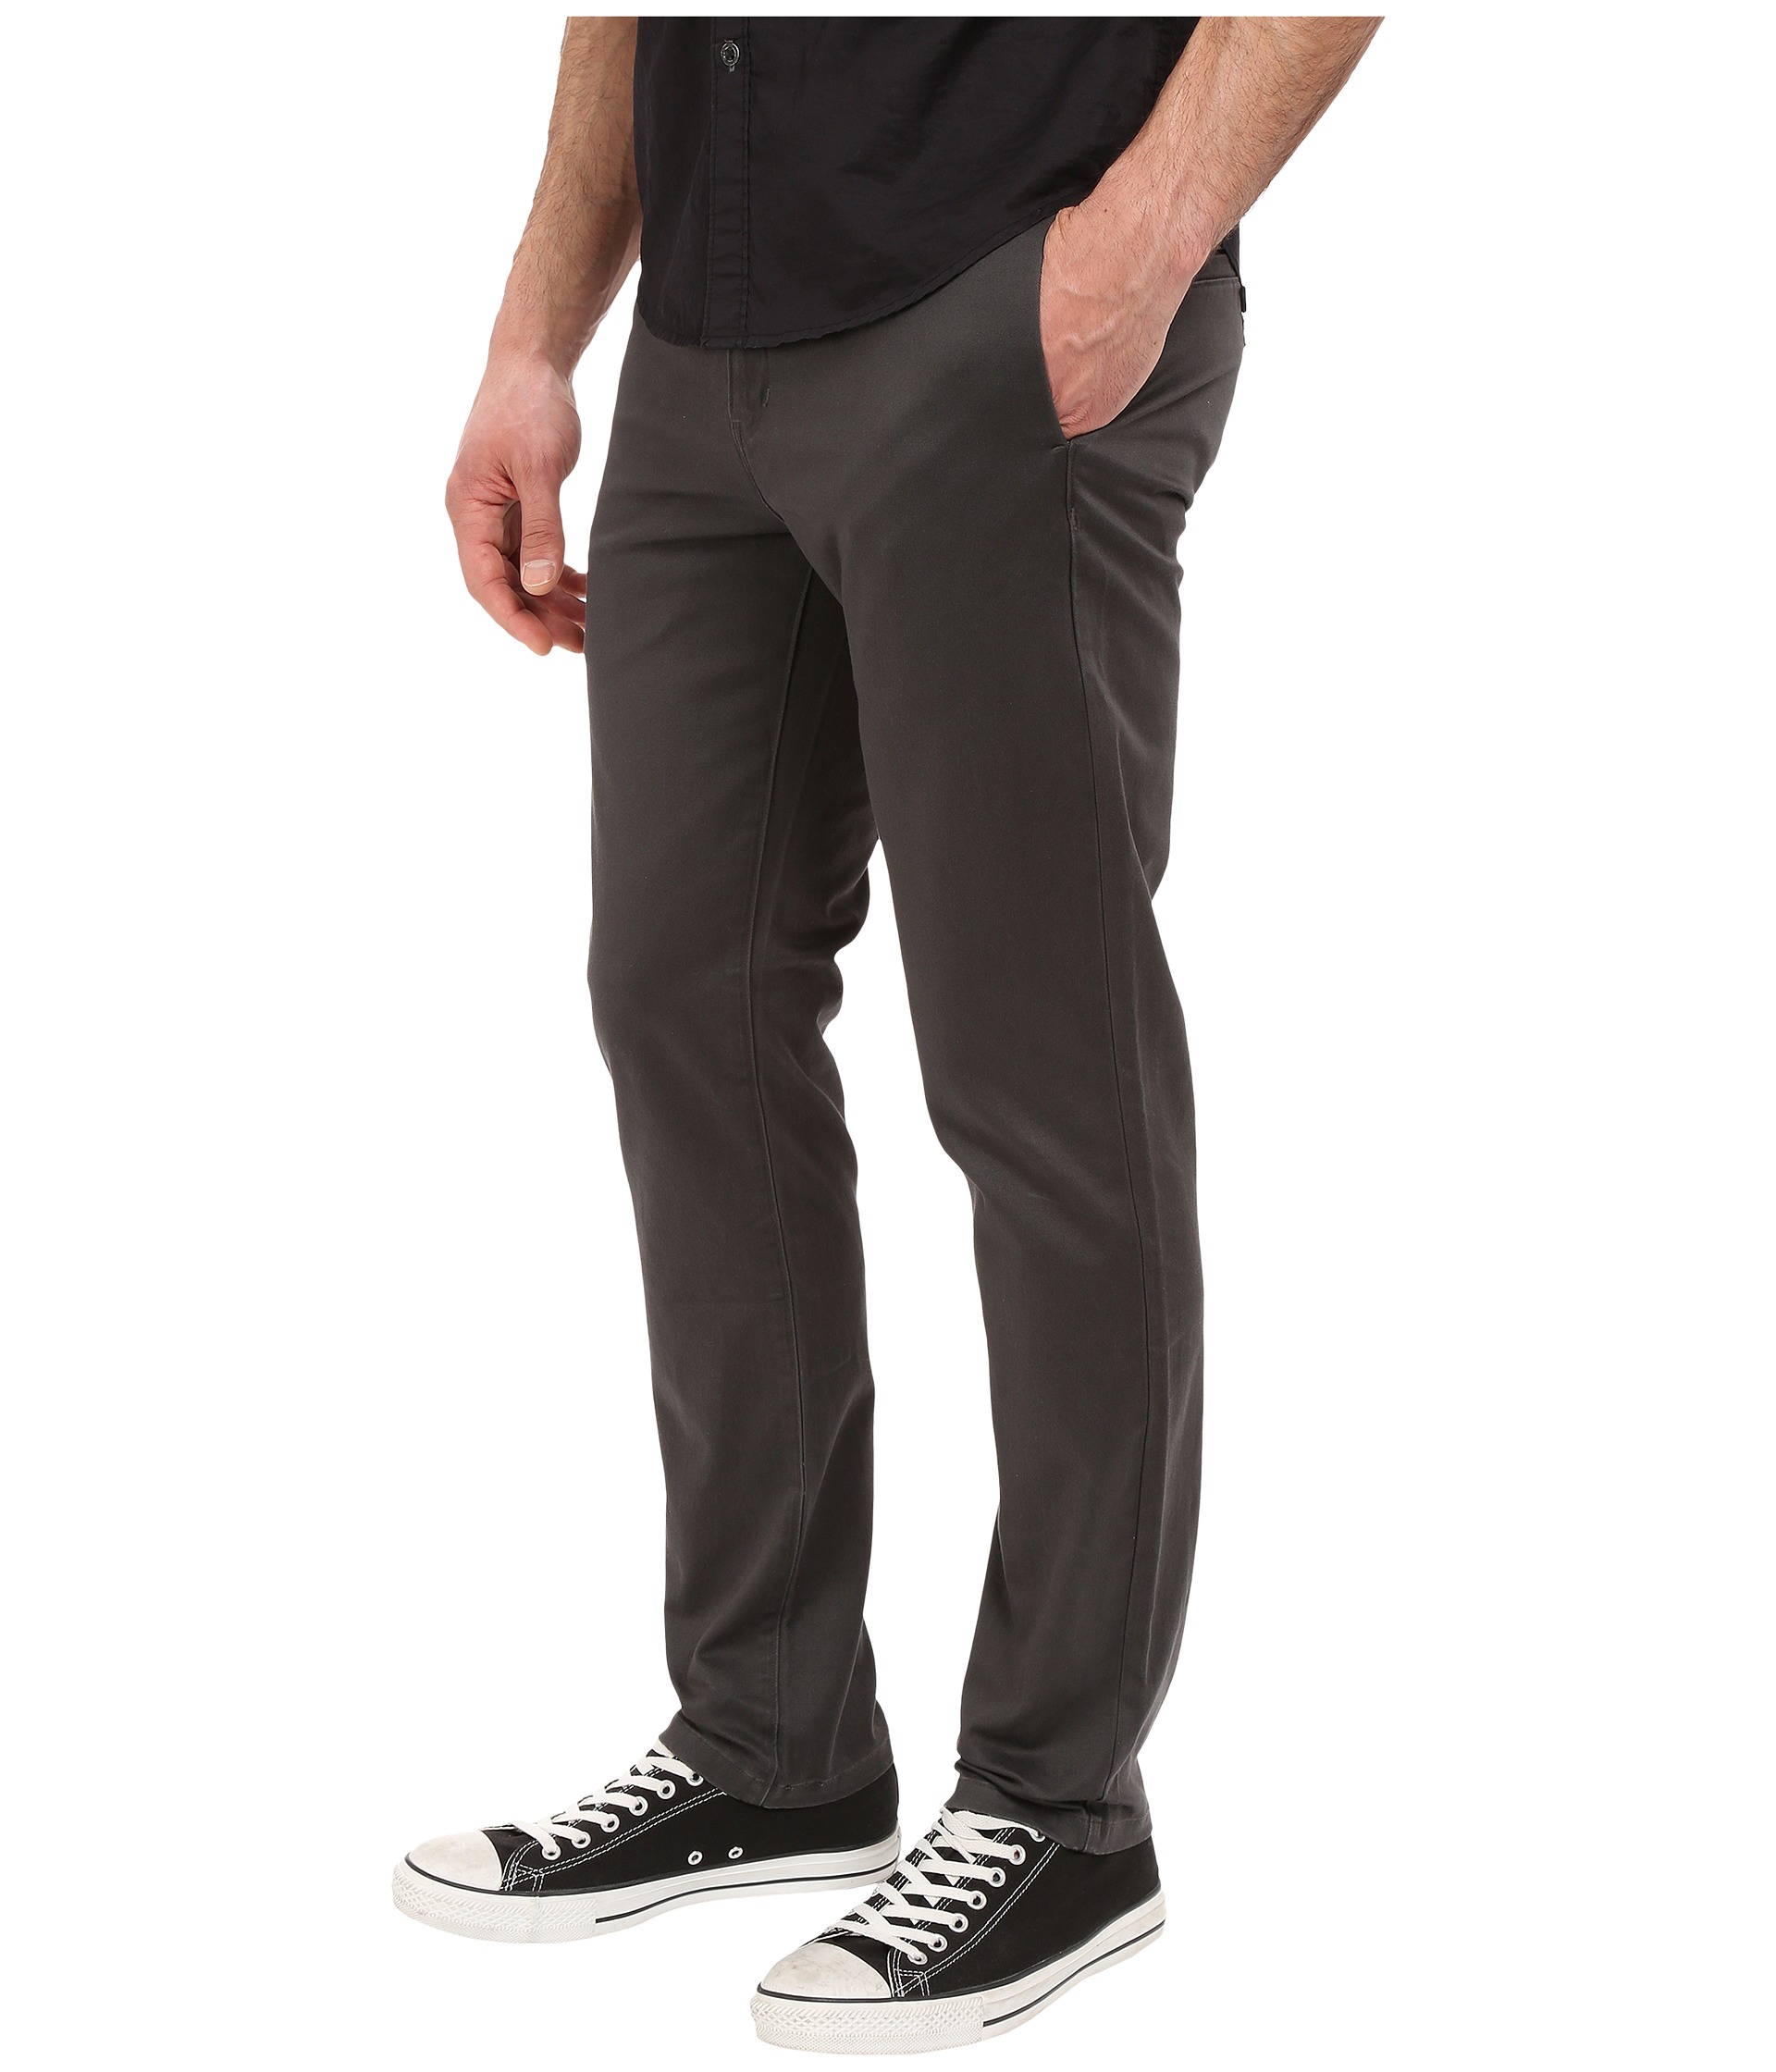 Levi's® Mens 511 Slim Fit - Welt Chino at Zappos.com